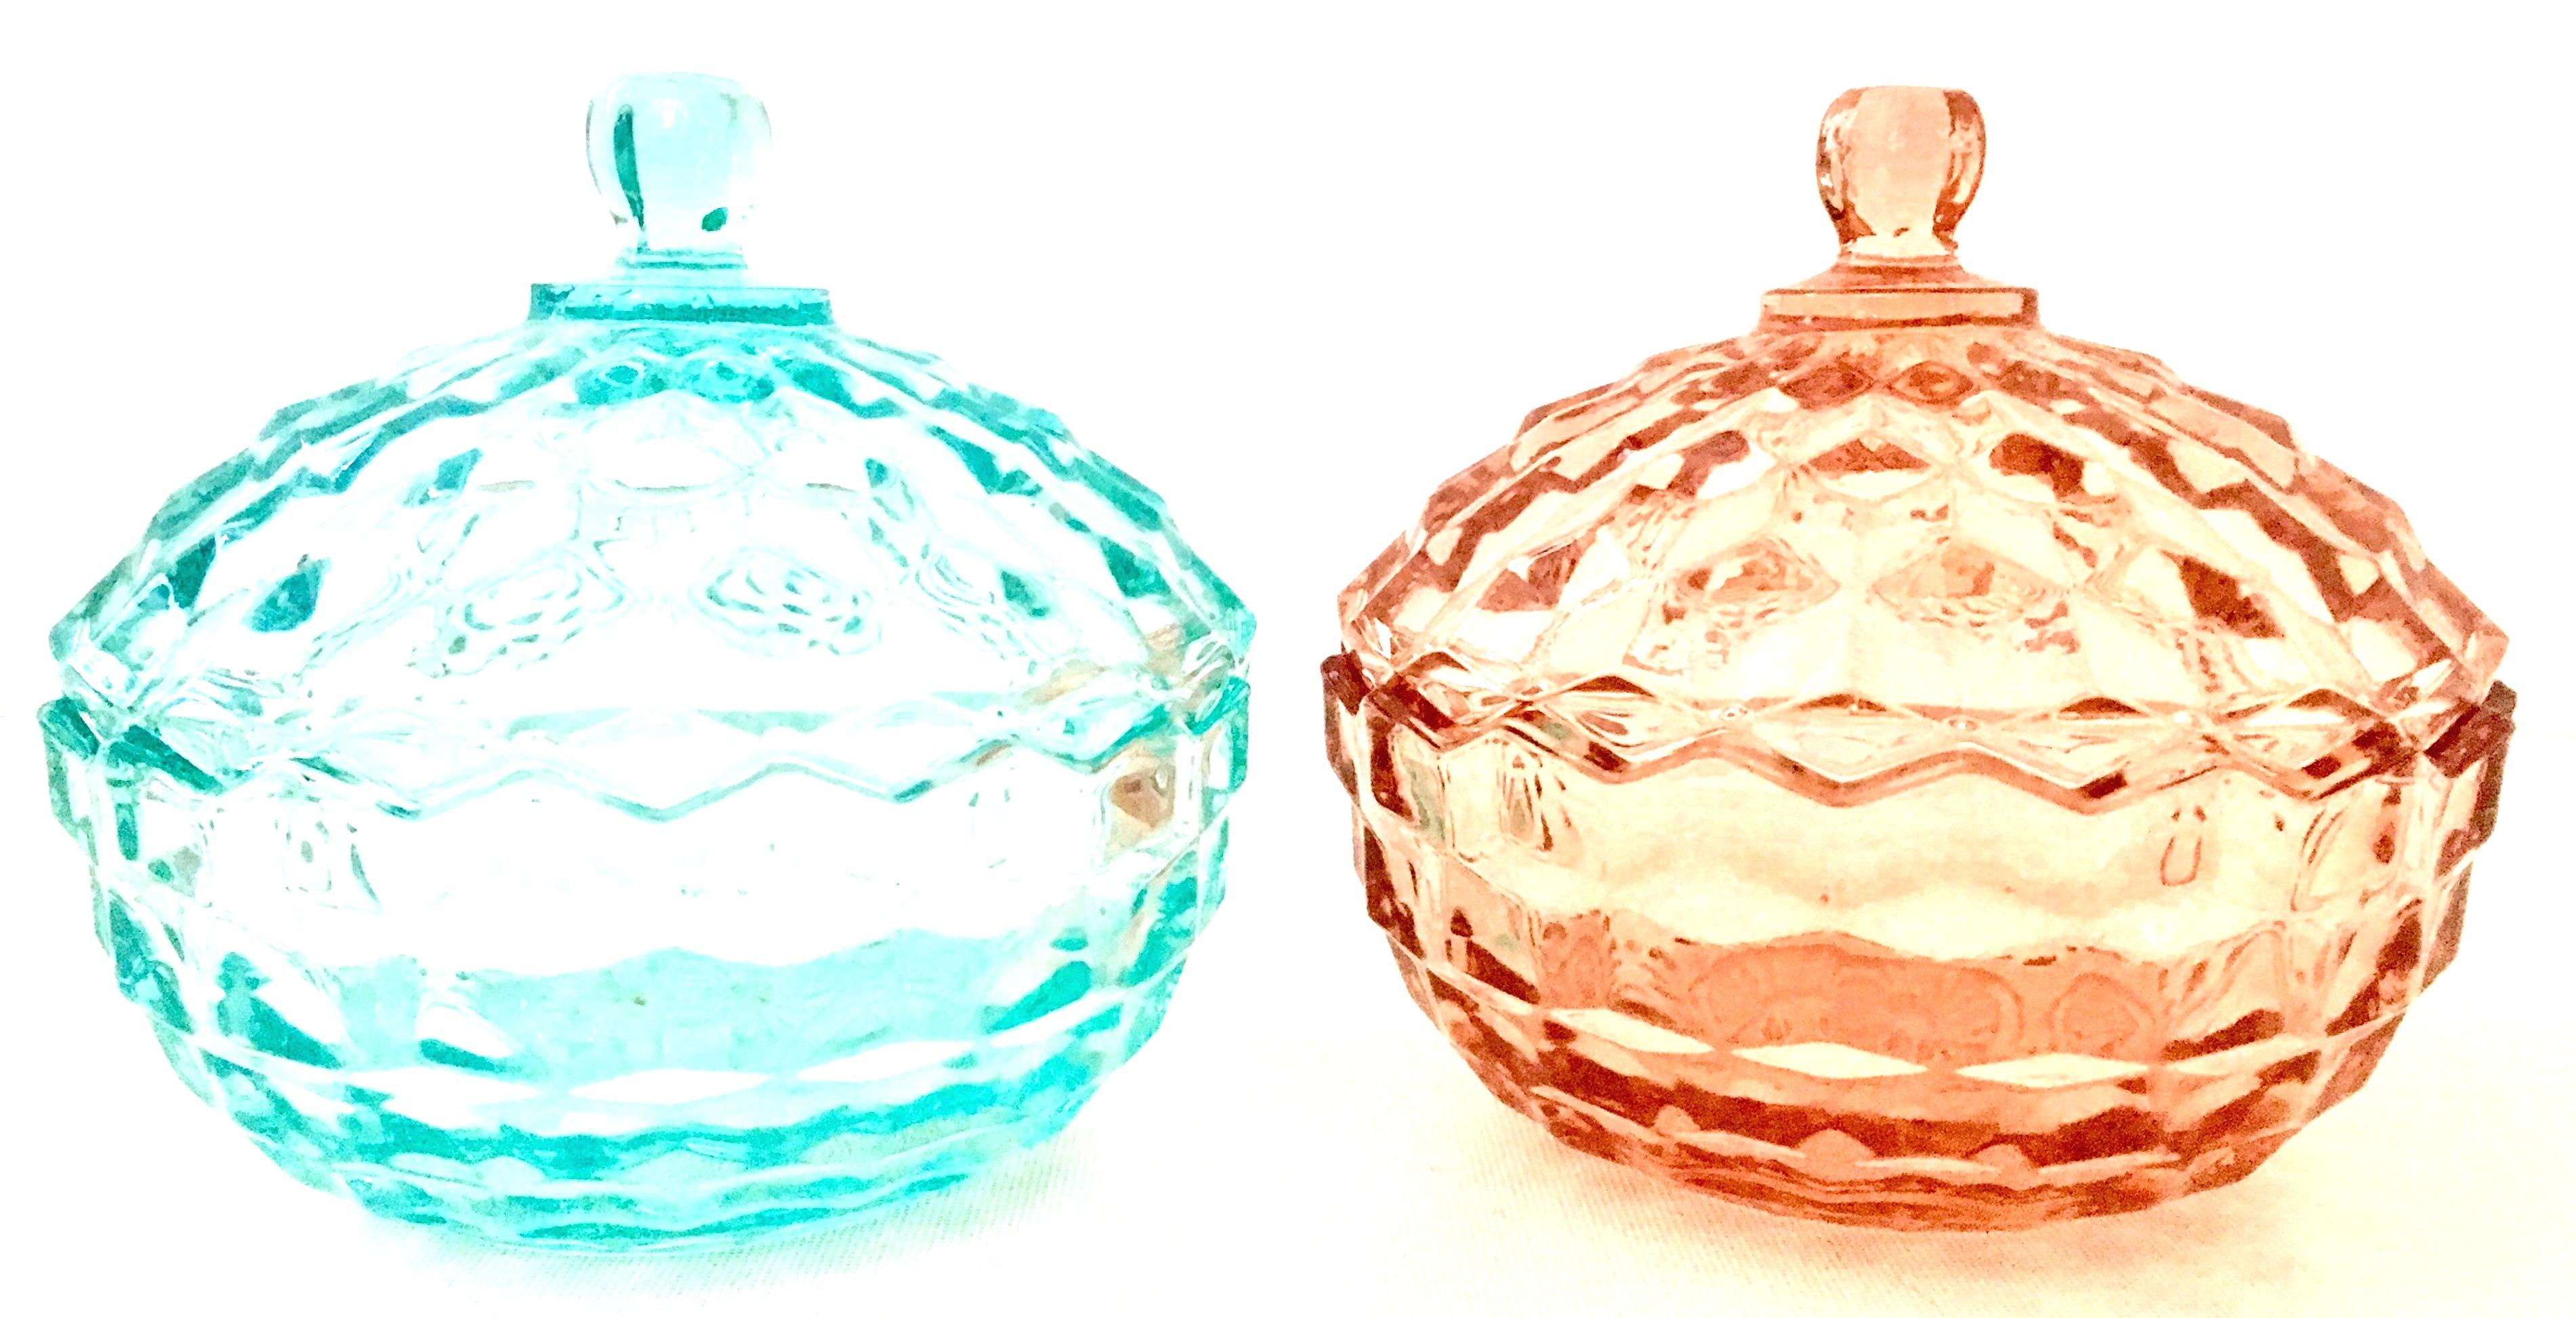 1920'S American diamond cut depression era glass lidded jars, set of two. Set includes one teal blue and one pink lidded jar.